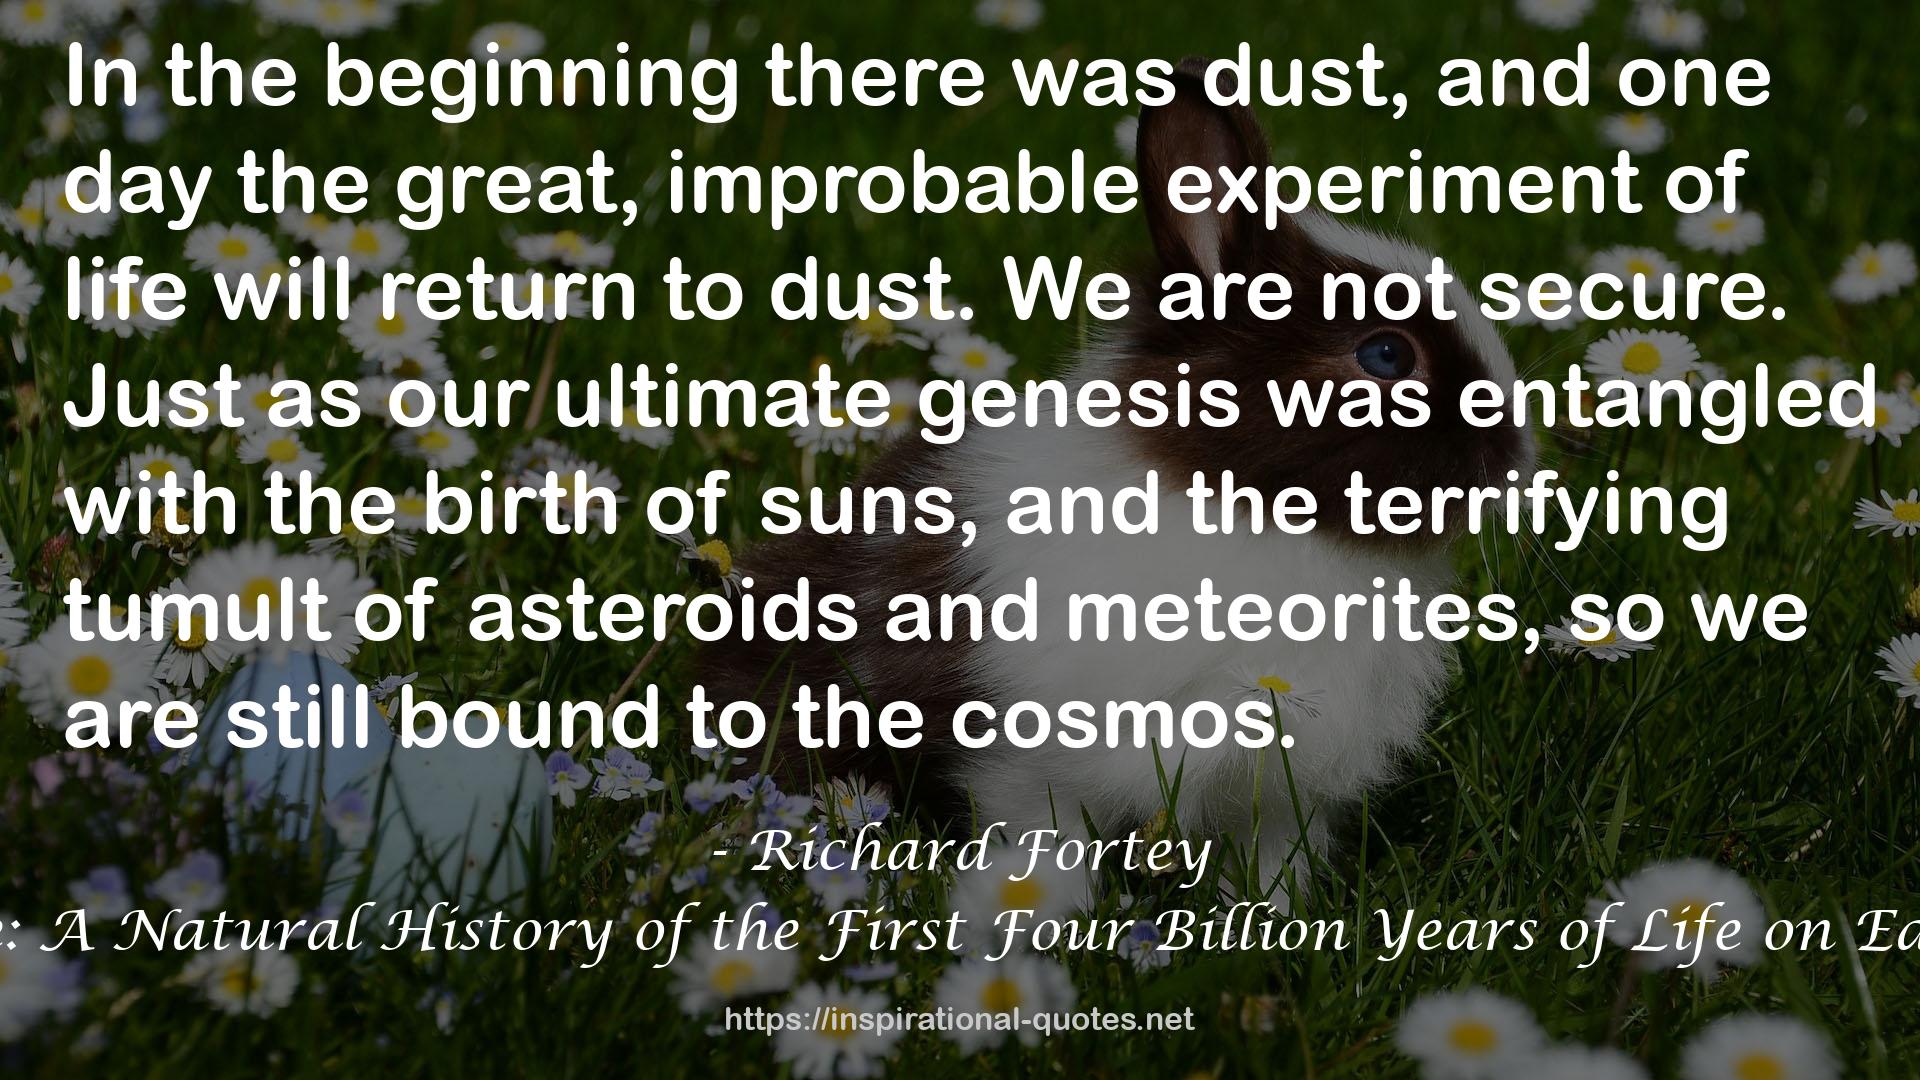 Life: A Natural History of the First Four Billion Years of Life on Earth QUOTES